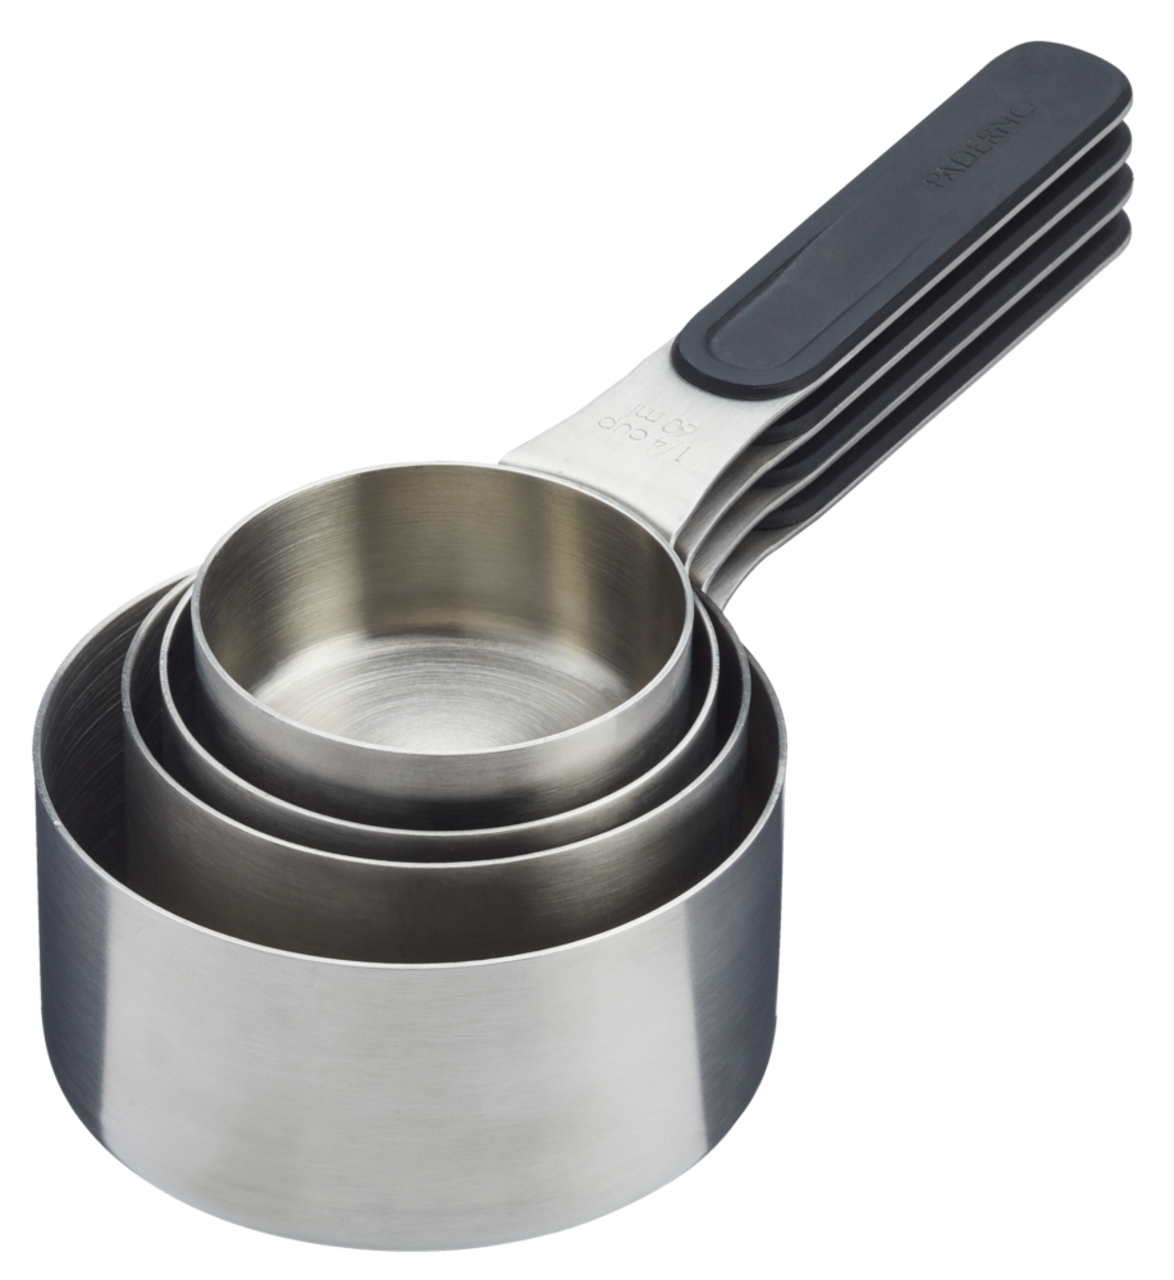 https://media-www.canadiantire.ca/product/living/kitchen/kitchen-tools-thermometers/1429582/paderno-measuring-cups-36e7b5a1-2ec6-4845-ad04-4c0651ee5b33.png?imdensity=1&imwidth=640&impolicy=mZoom